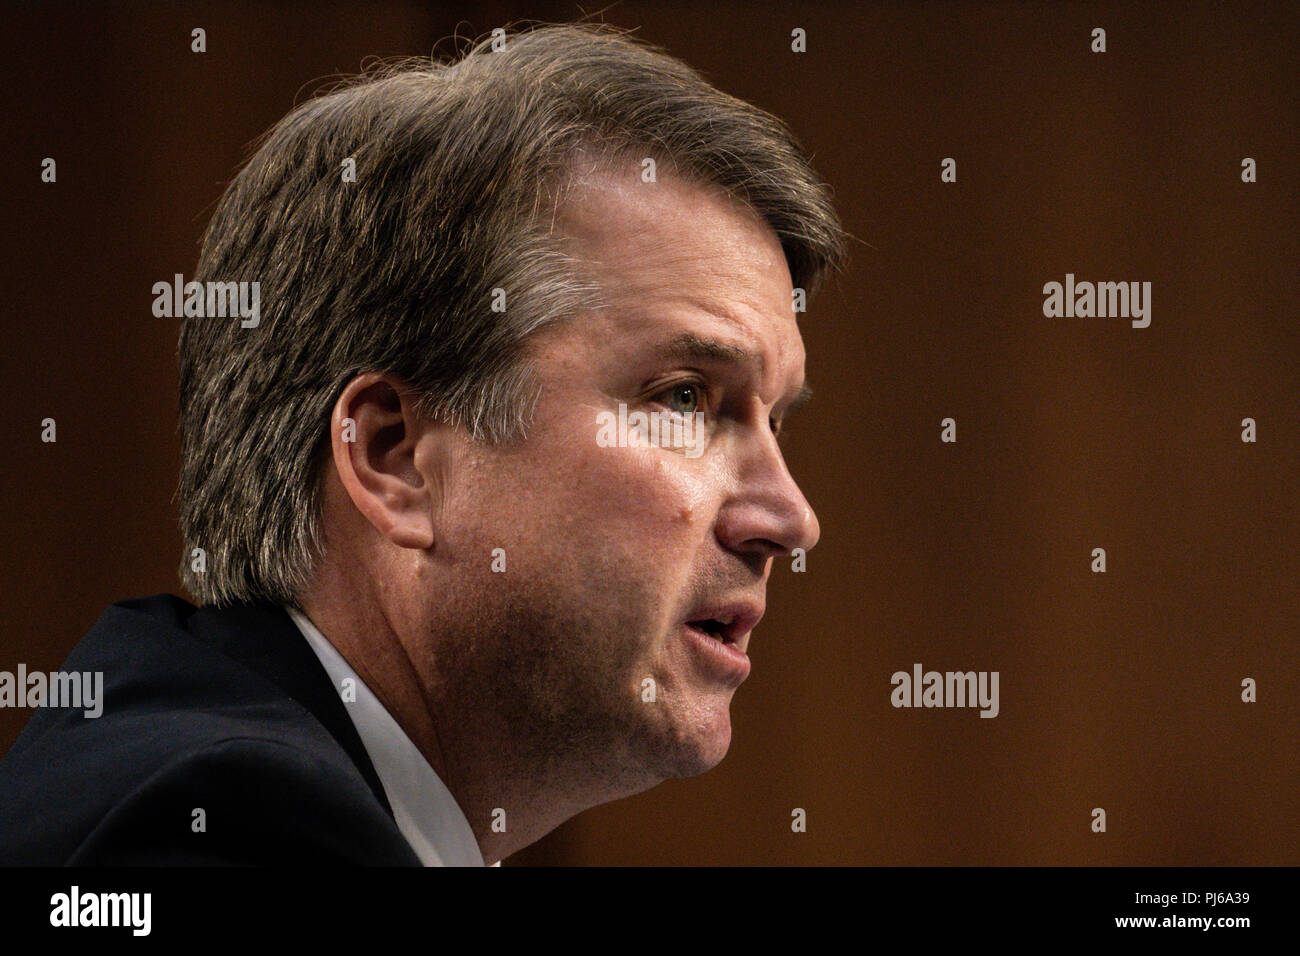 Washington, DC, USA. 4th Sep, 2018. U.S. Supreme Court Associate Justice nominee Brett Kavanaugh makes his opening statements during his confirmation hearing before the Senate Judiciary Committee in the Hart Senate Office Building in Washington, DC on Sept 4, 2018. Credit: Ken Cedeno/ZUMA Wire/Alamy Live News Stock Photo